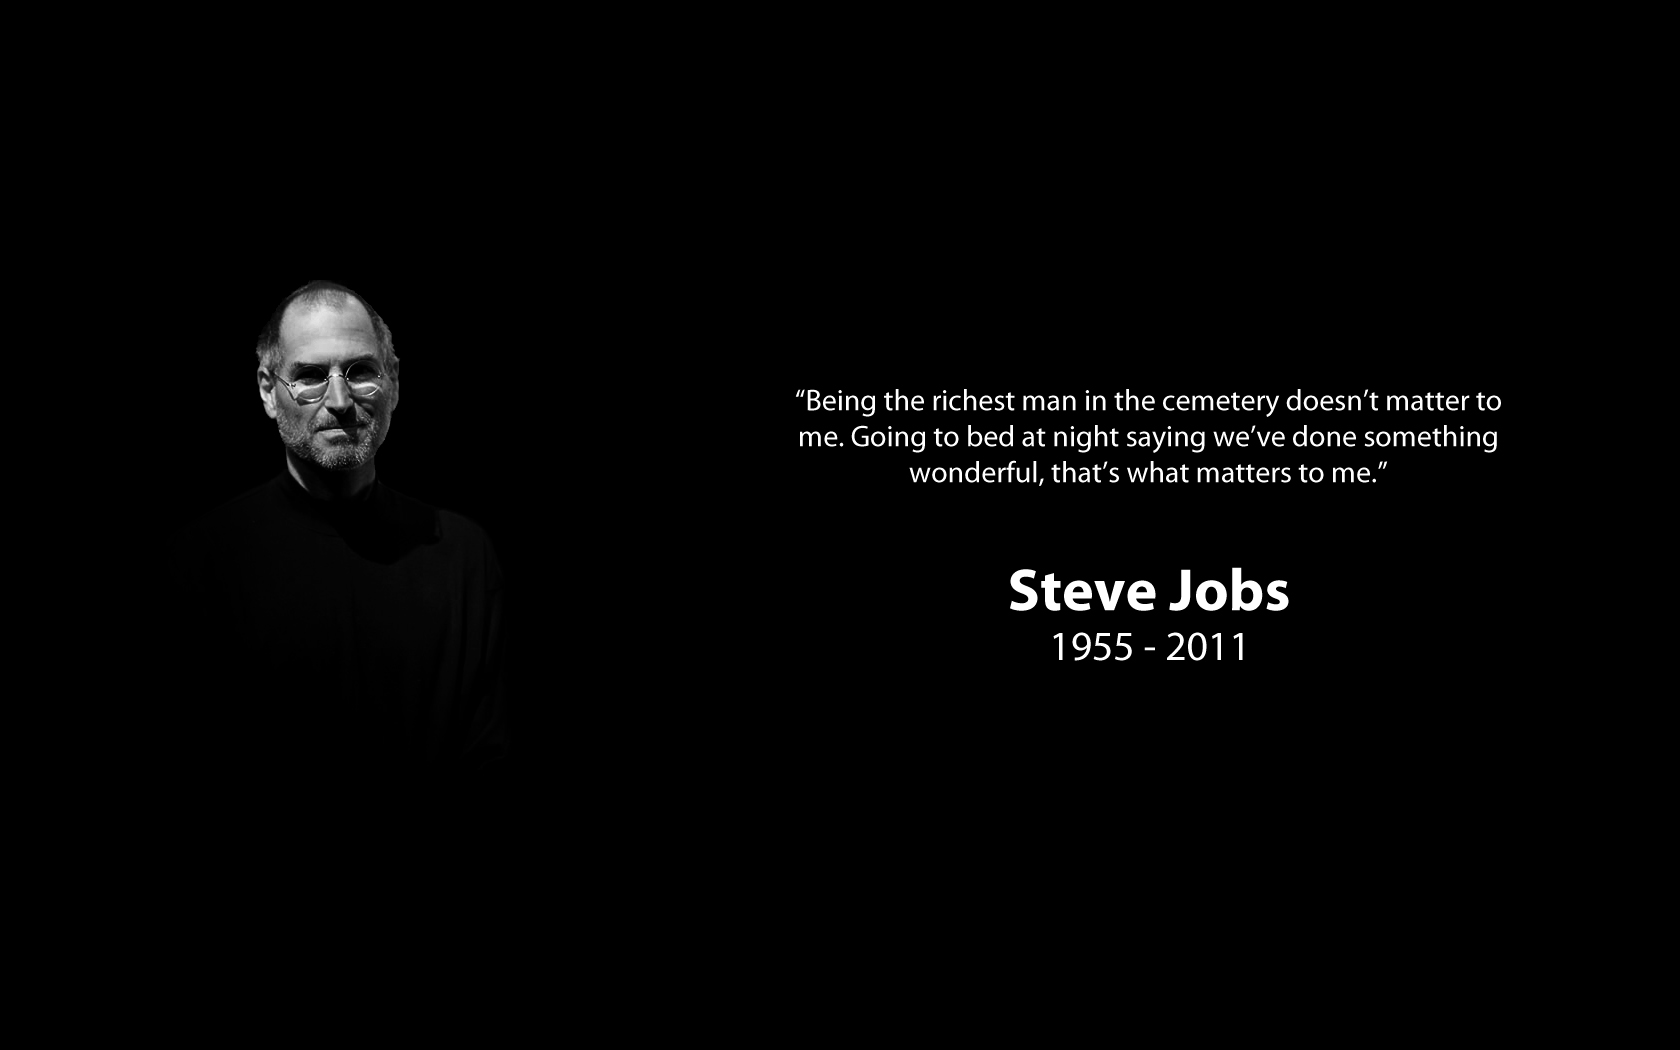 Steve Jobs Wallpaper With Quotes Discussing Social Media